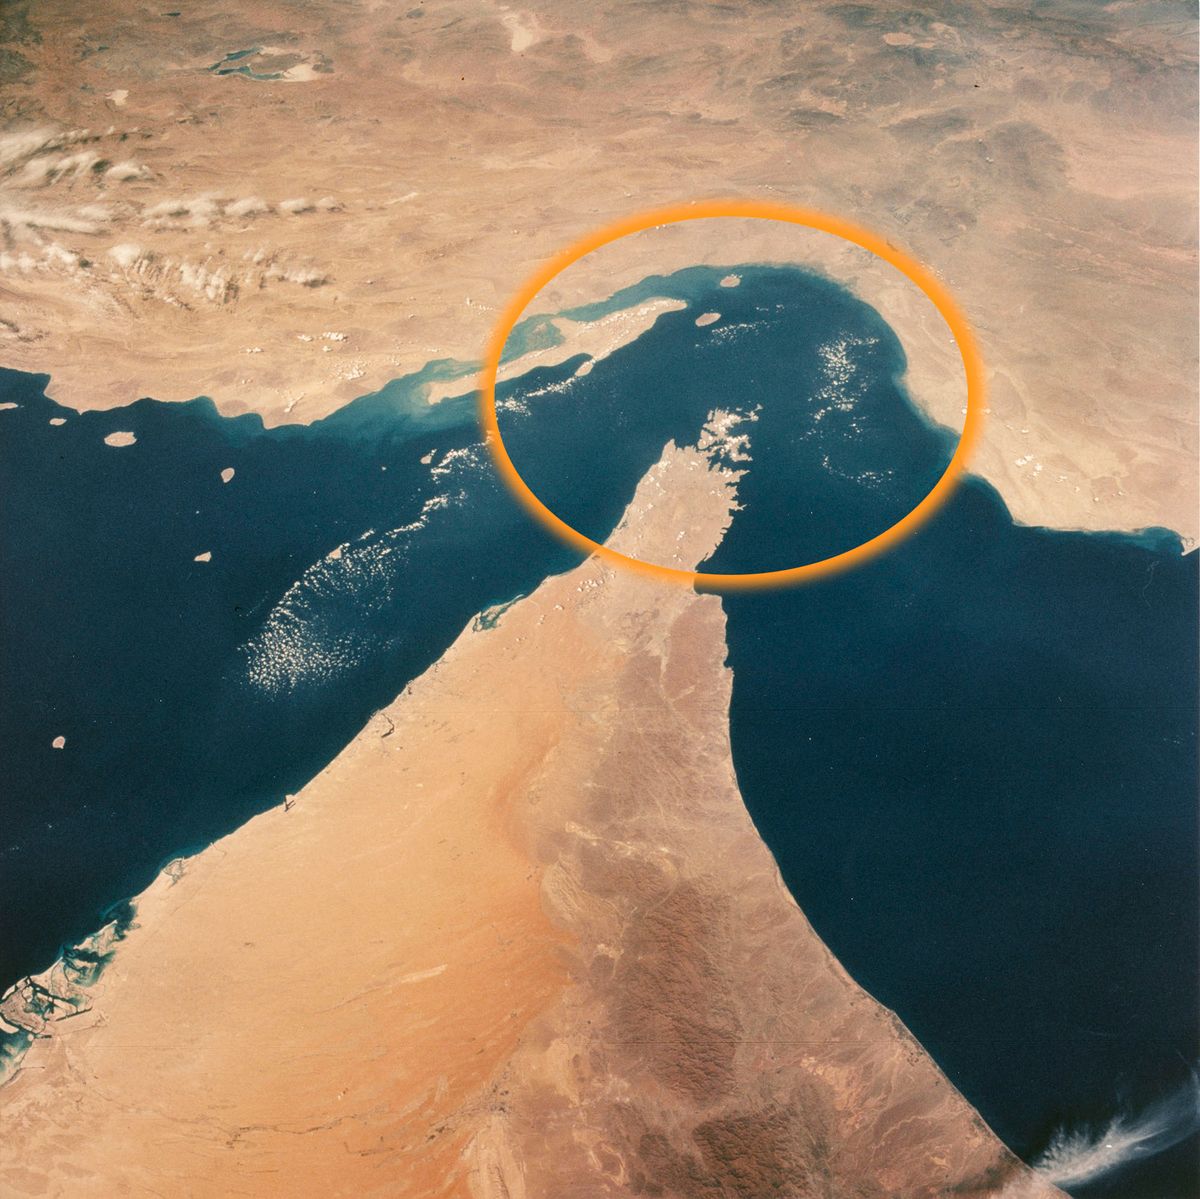 View looking north showing the Strait of Hormuz, connecting the Gulf of Oman with the Persian Gulf, with the Zagros Mountains and Qeshm Island of Iran in the background, and areas of Oman, Muscat and the United Arab Emirates in the foreground, as seen from the Space Shuttle Columbia during shuttle mission STS-52, 22nd October to 1st November 1992. The primary mission objectives of STS-52 are the deployment of the Laser Geodynamics Satellite II (LAGEOS-II), a joint effort between NASA and the Italian Space Agency (ASI), and the operation of the United States Microgravity Payload-1 (USMP-1). (Photo by Space Frontiers/Archive Photos/Hulton Archive/Getty Images) 1332156775